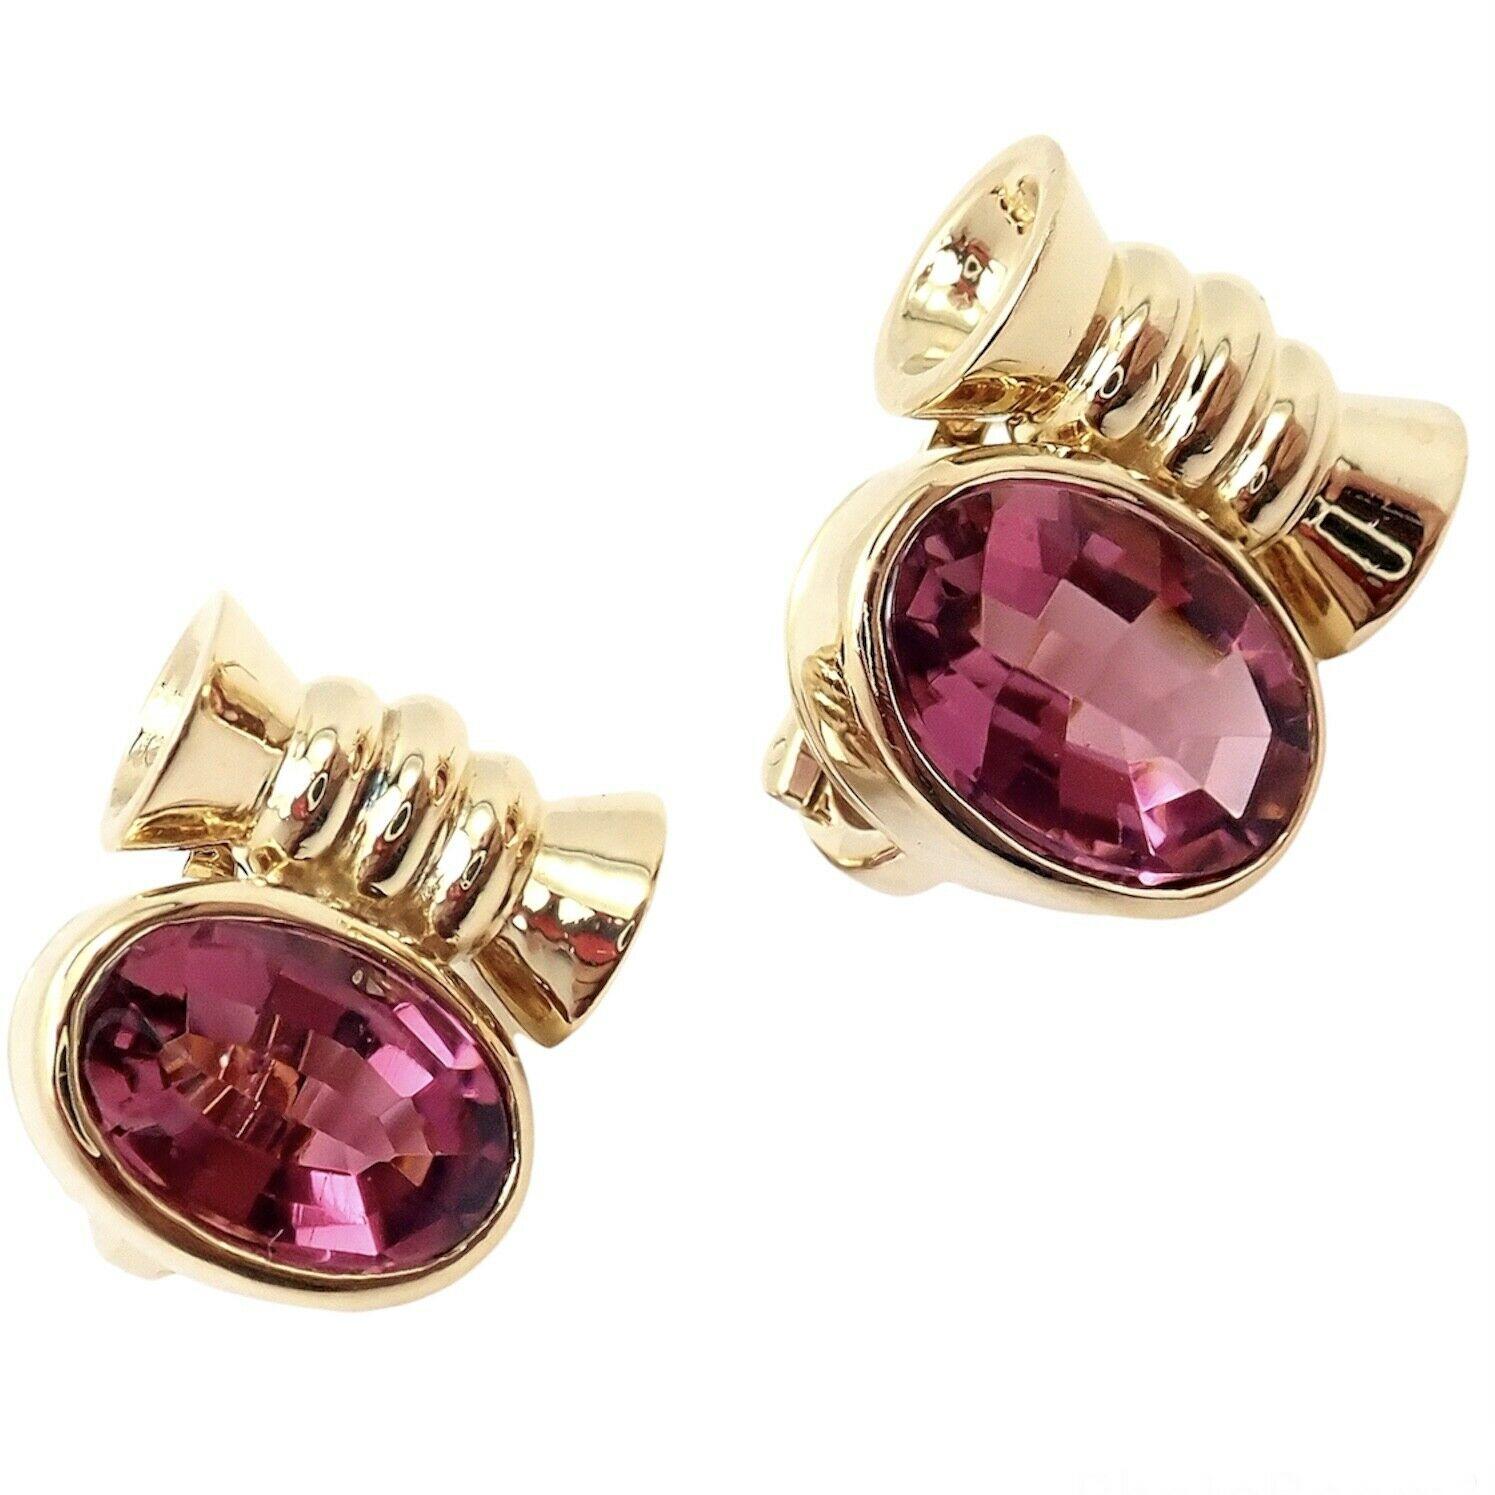 18k Yellow Gold Pink Tourmaline Earrings by Bulgari. 
With 2x round brilliant cut intense pink tourmalines total weight approximately 
2.60ctw
Each tourmaline is 12mm x 9mm x 2mm
These earrings are made for pierced ears.
Details:
Measurements:  14mm